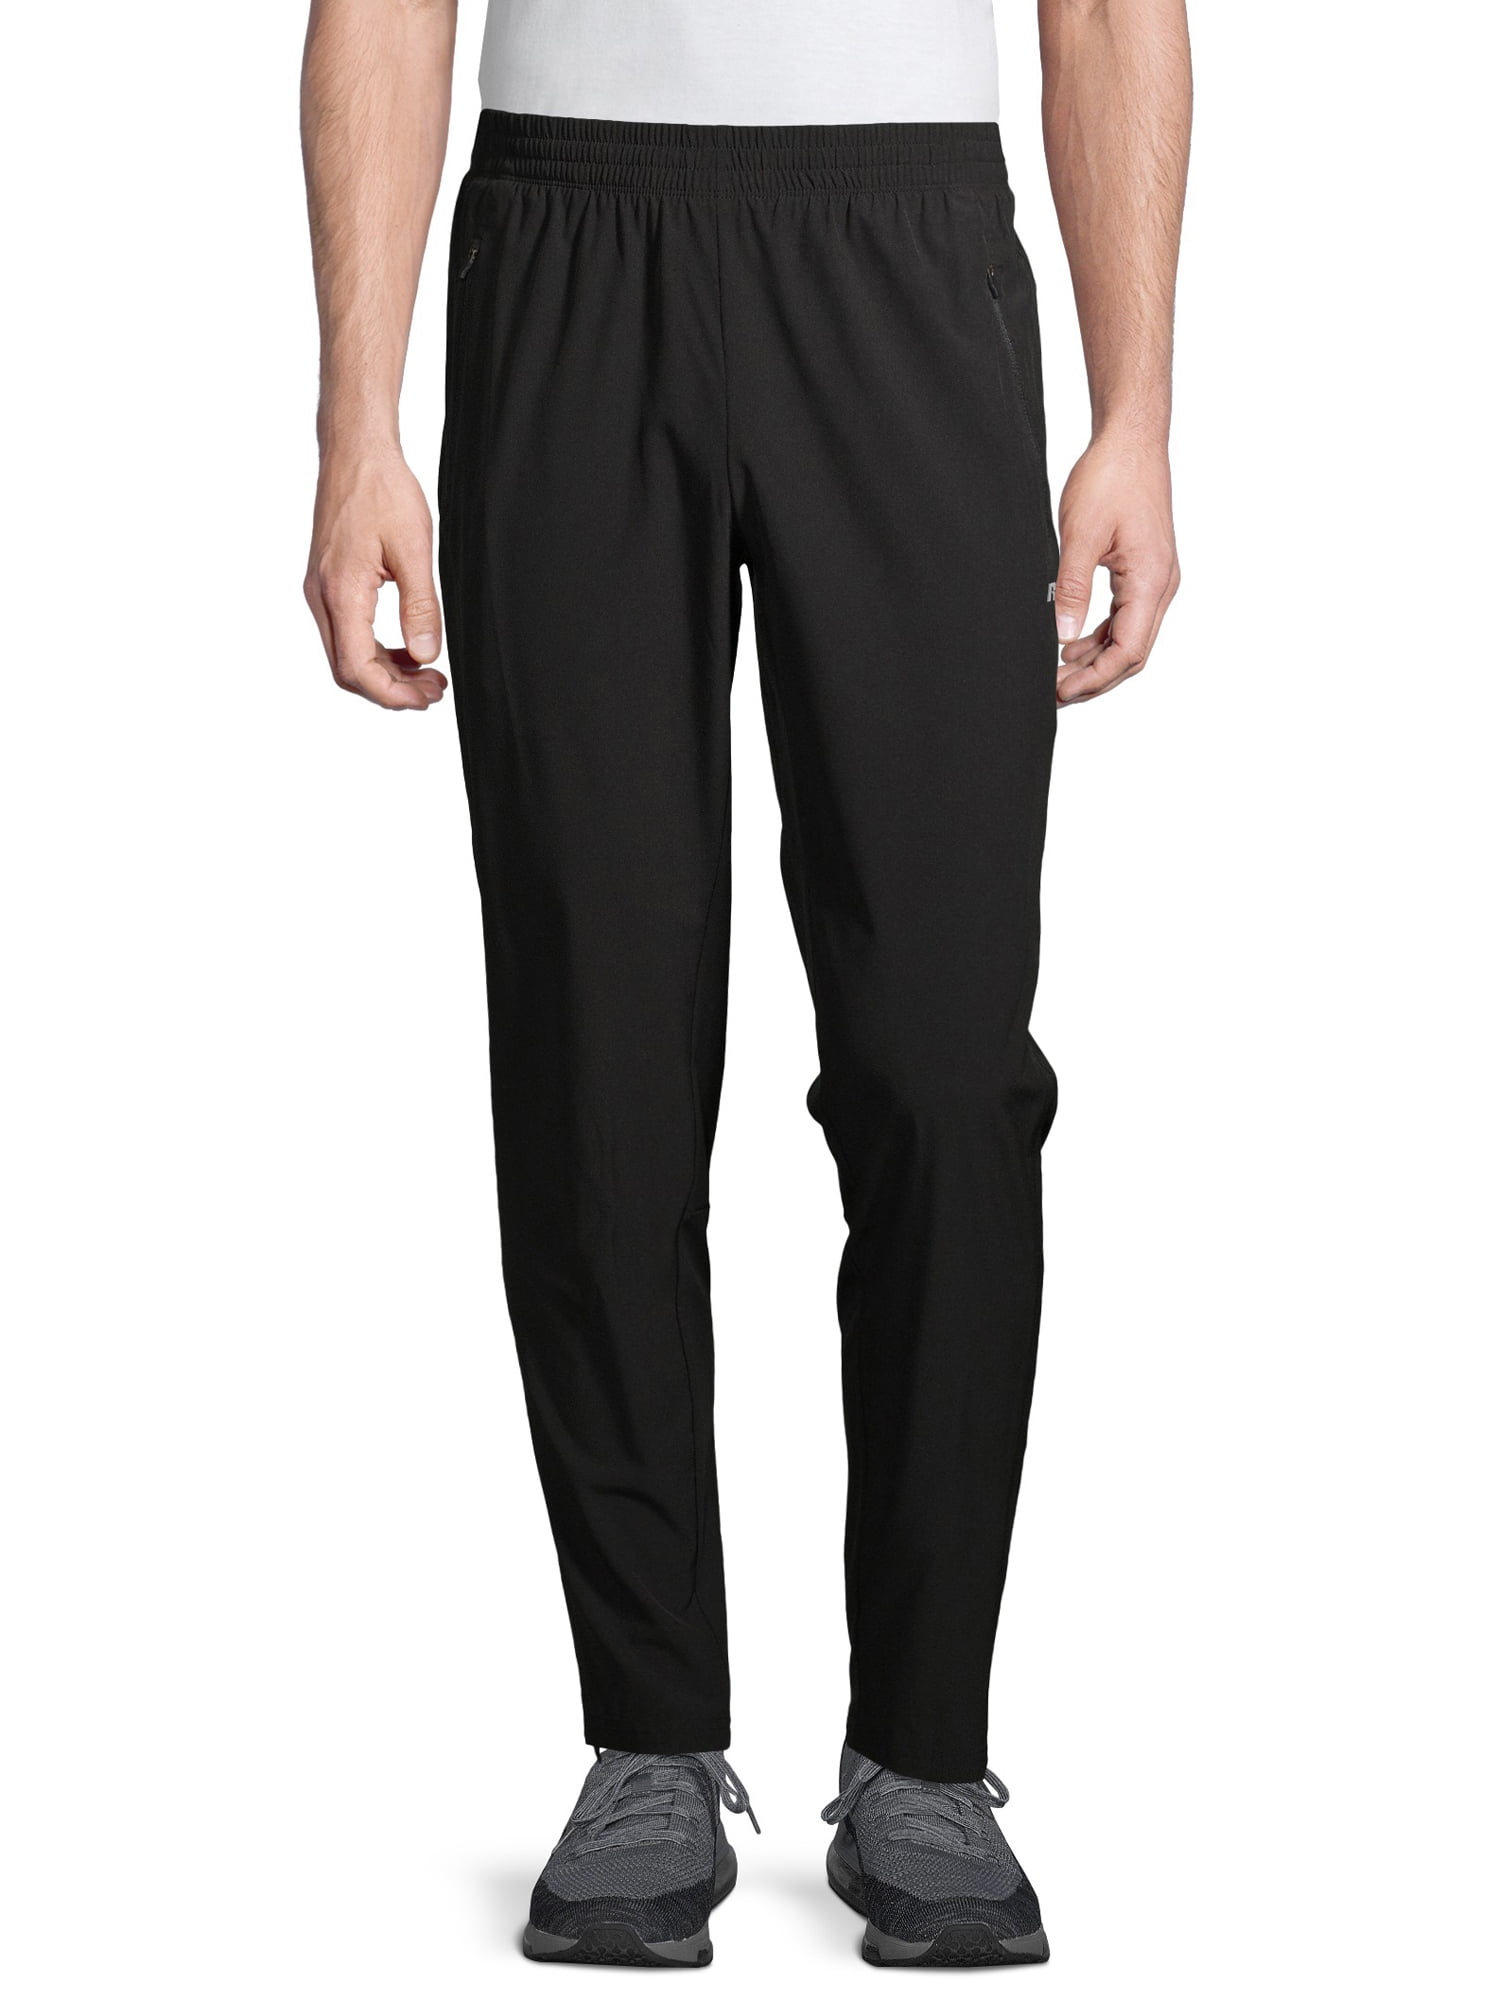 Russell Men's and Big Men's Active Woven Pants, up to 5XL - Walmart.com